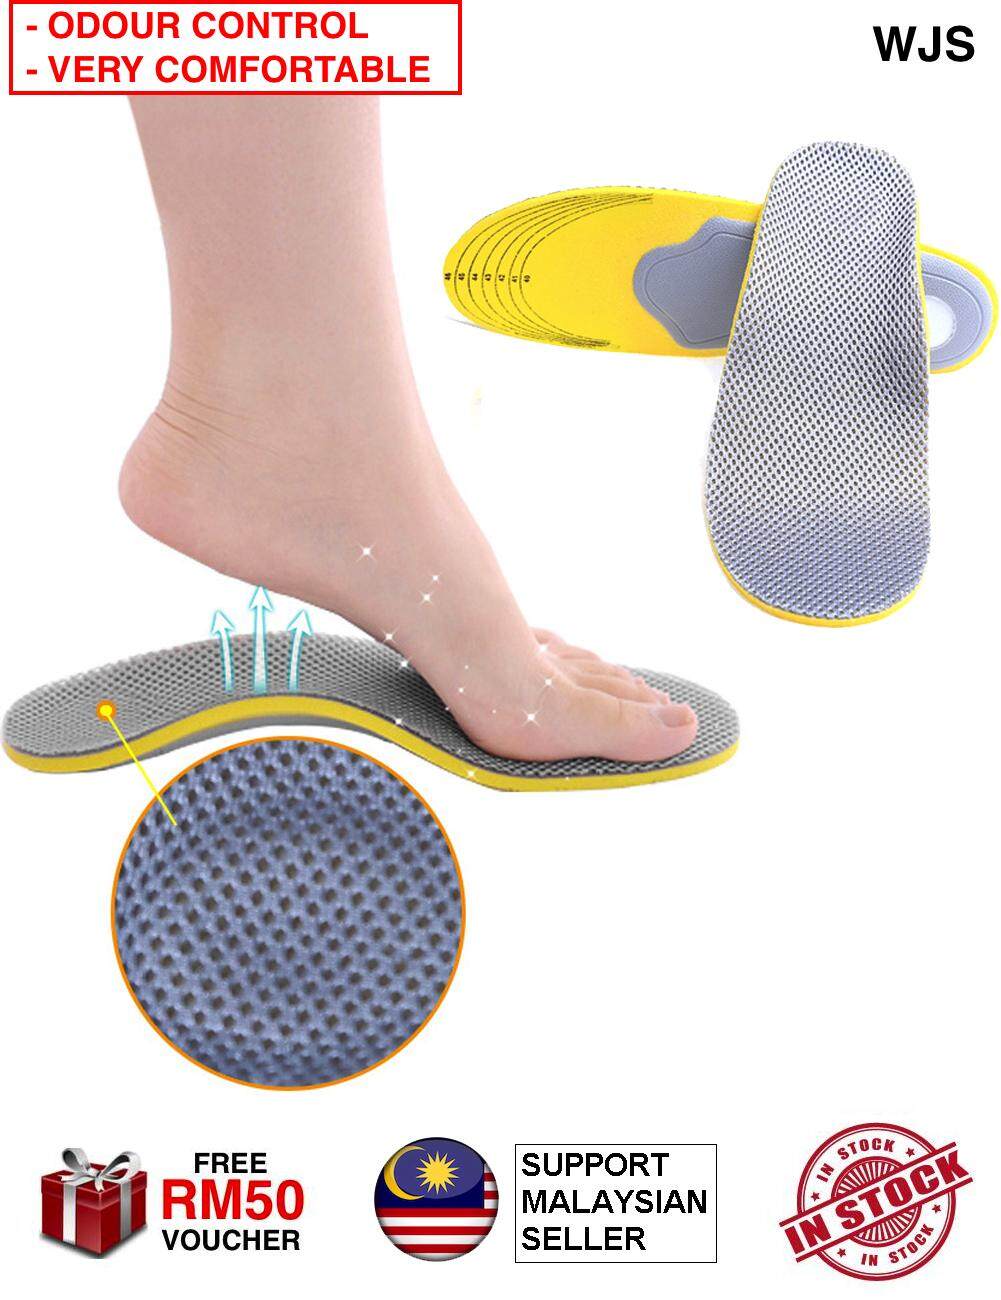 (ODOUR CONTROL) WJS Orthotic Orthopaedic Arch Support Shoe Insoles Pads Shoe Pad Tapak Kasut Shoe Insole Hong Kong Feet HK Foot Control Feet Smell YELLOW GREY Size S L [FREE RM 50 VOUCHER]